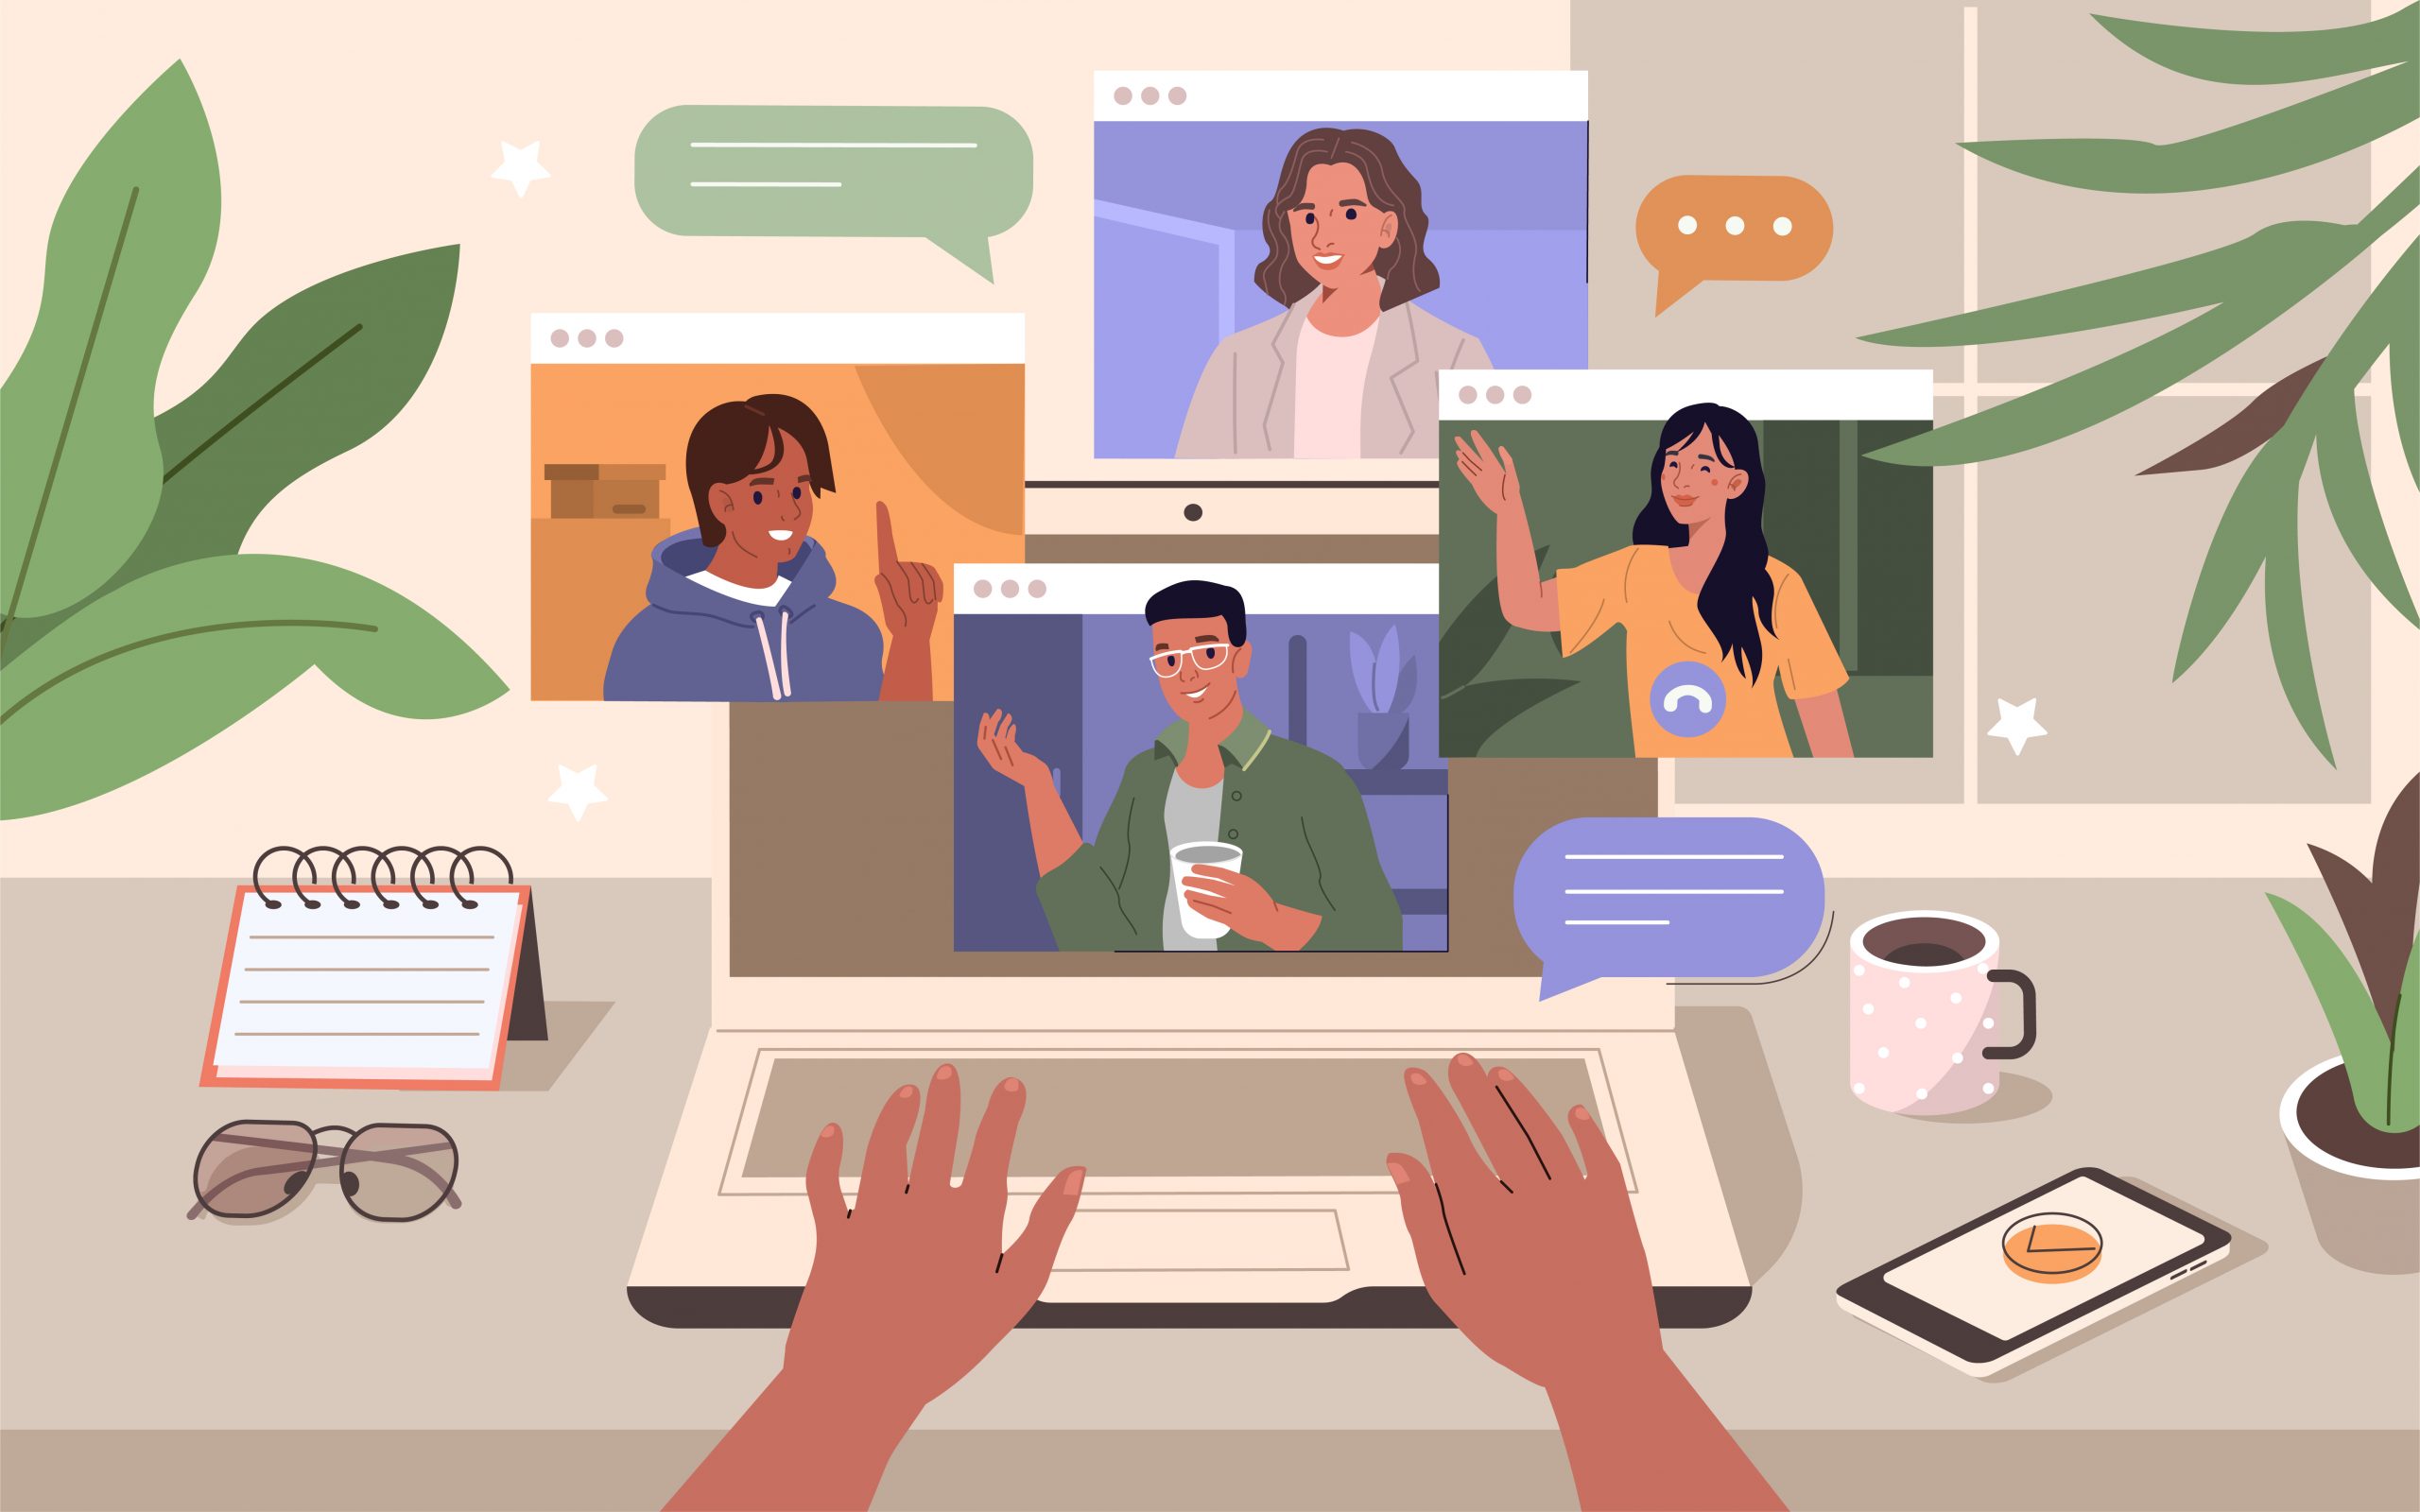 This is an image depicting employees having a discussion using a remote conferencing platform, demonstrating how we tend to connect in the Hybrid world. The image serves as an example for the NeuroLeadership Institute's point of view on platform-first cultures.